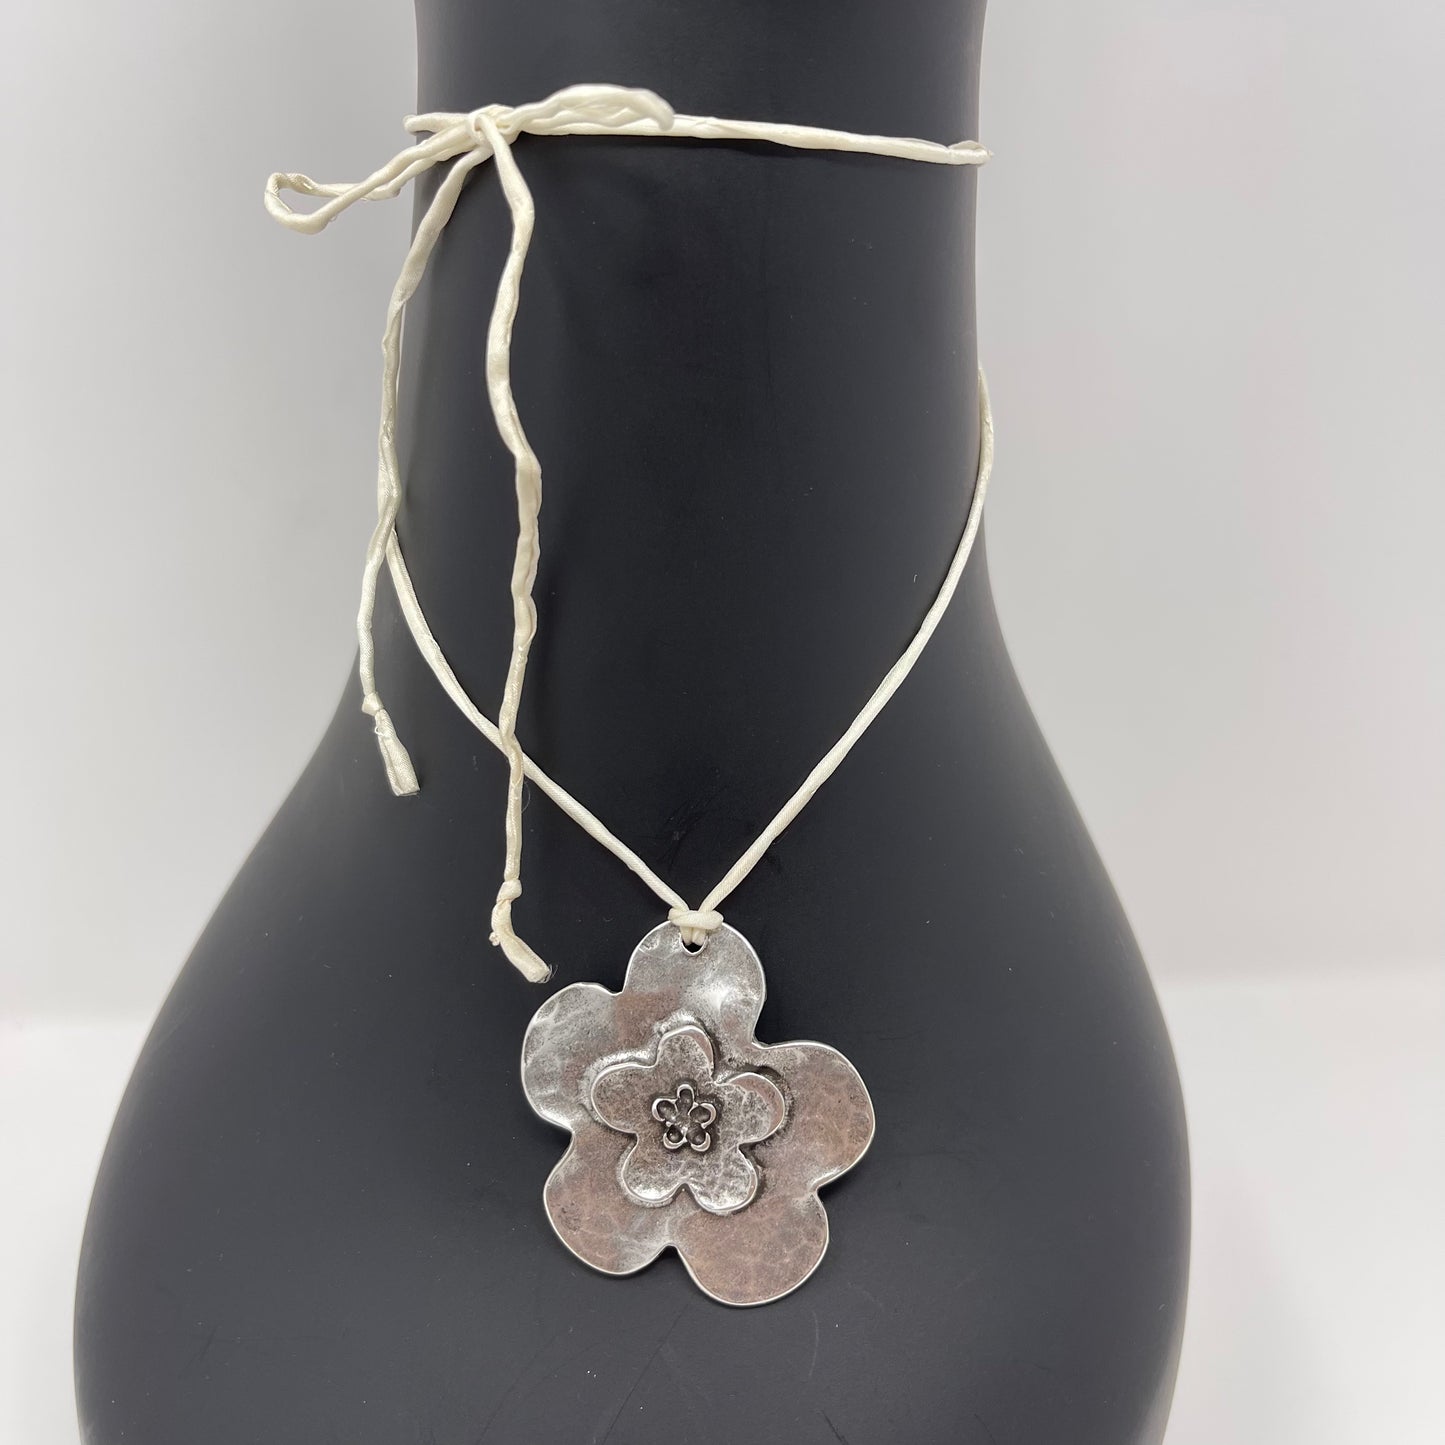 Silver Flower Pendant Necklace - Ivory White